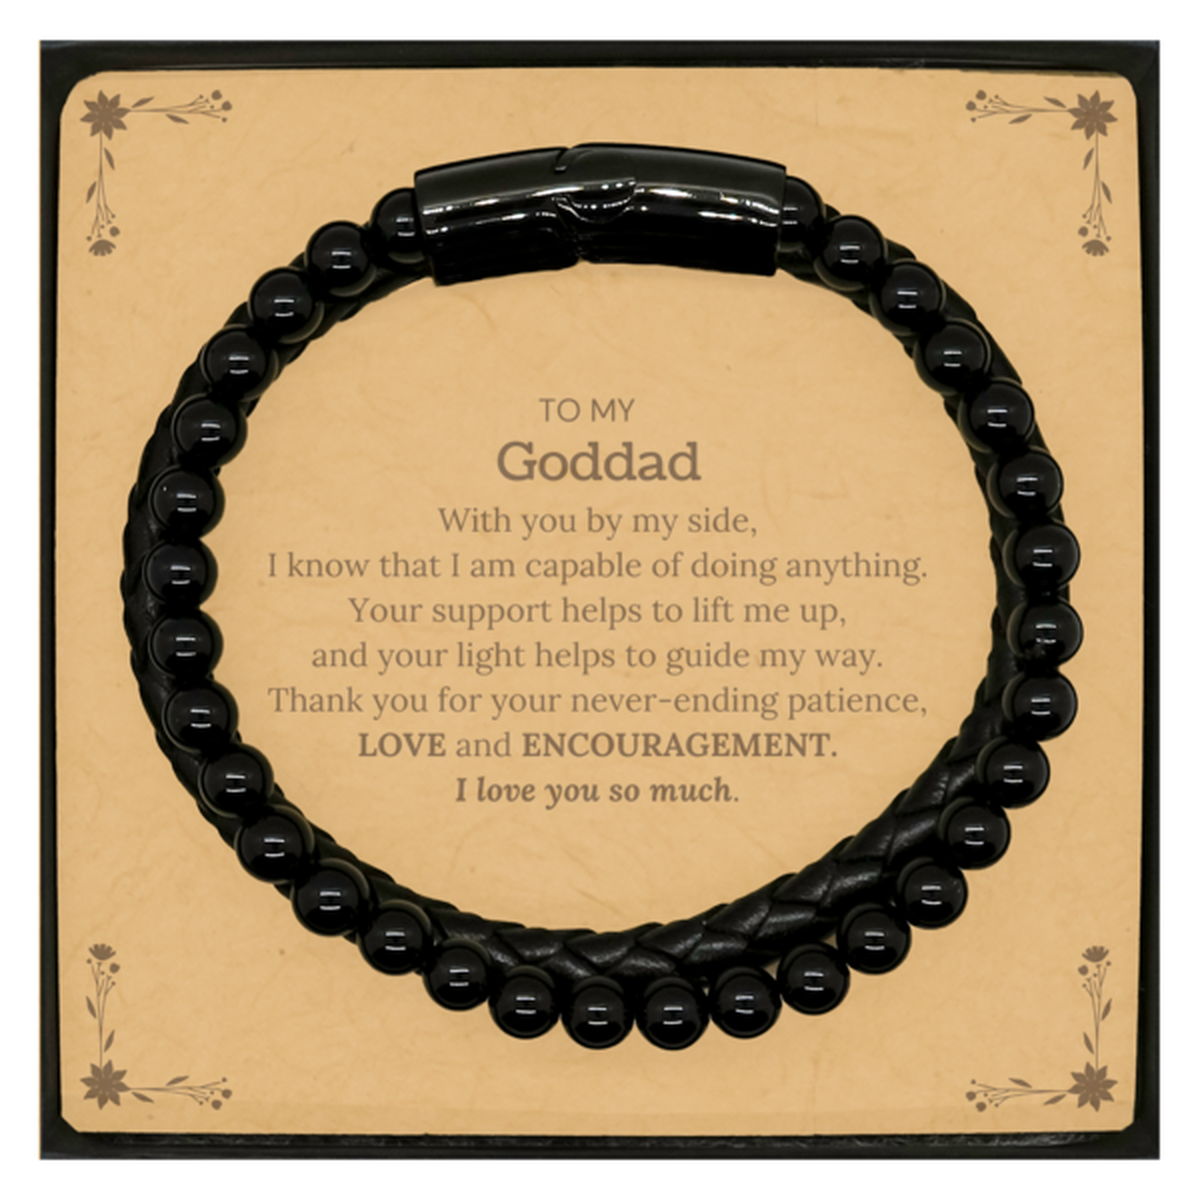 Appreciation Goddad Stone Leather Bracelets Gifts, To My Goddad Birthday Christmas Wedding Keepsake Gifts for Goddad With you by my side, I know that I am capable of doing anything. I love you so much